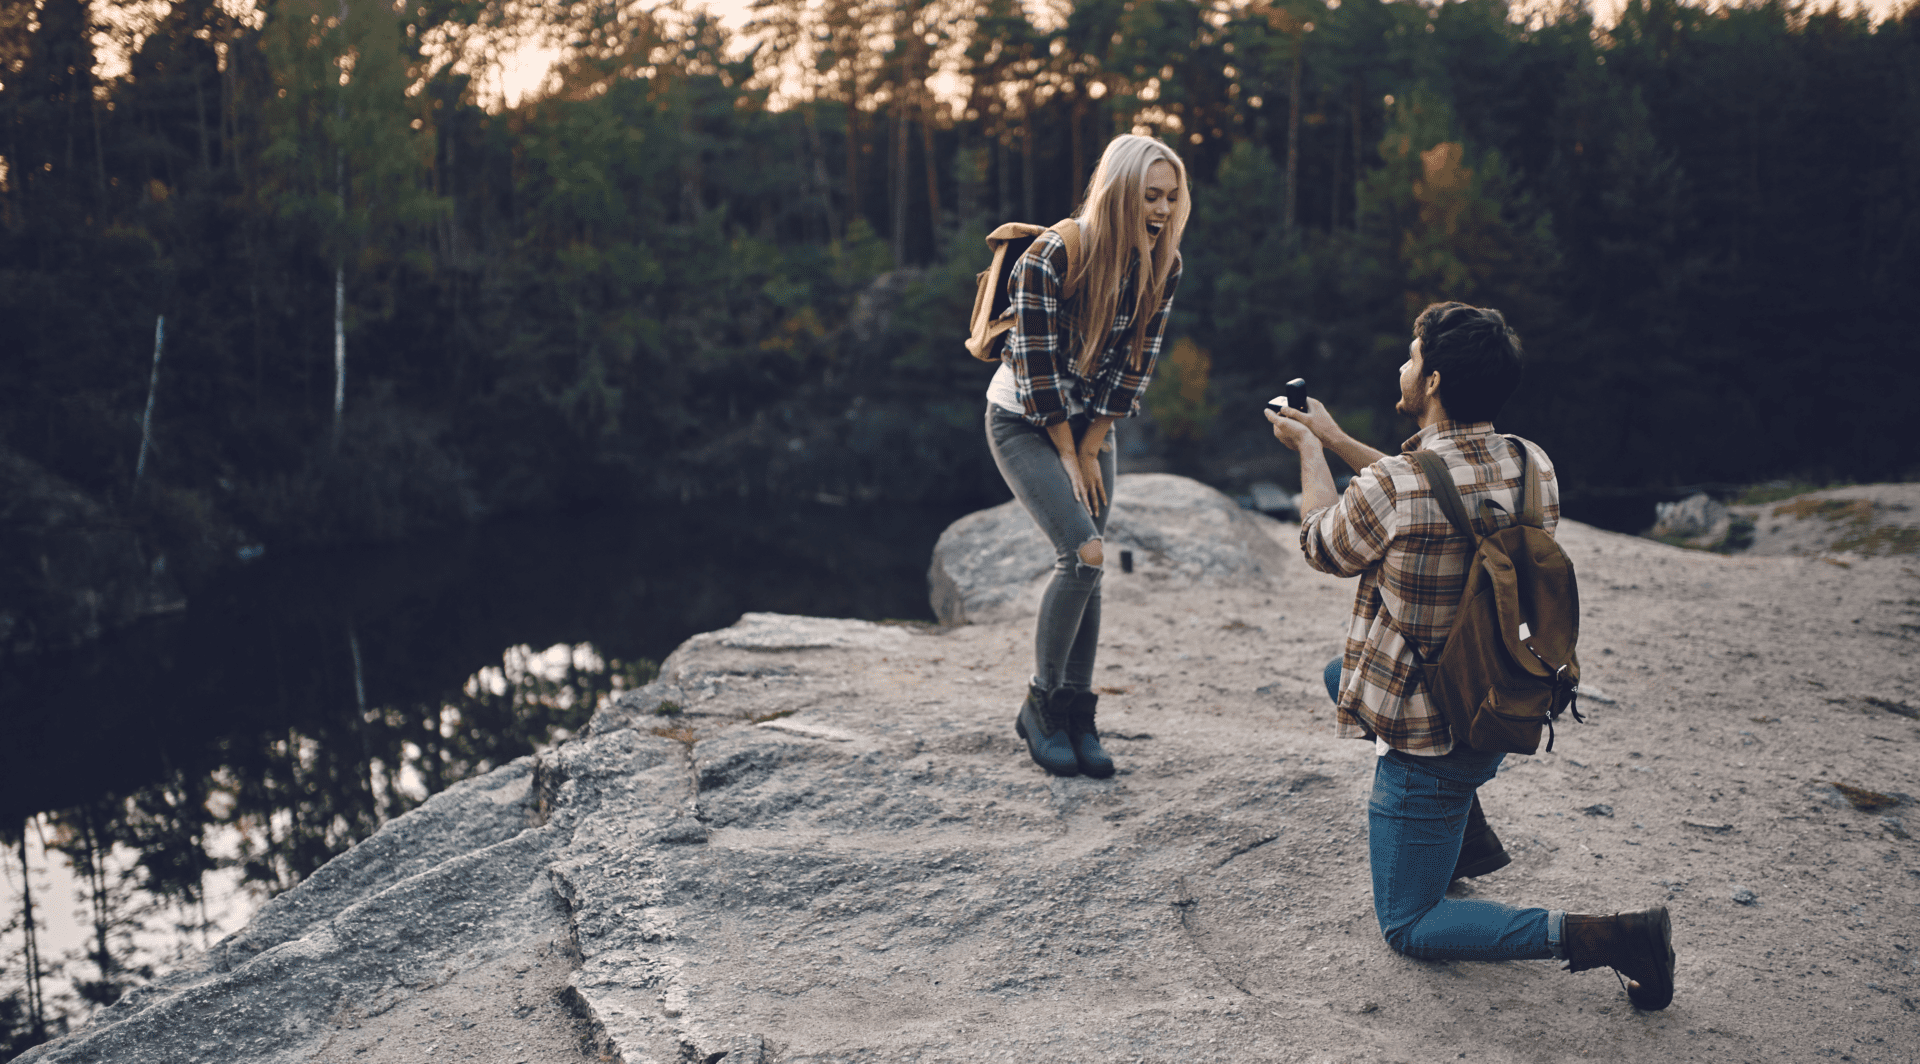 Young male adult on his knees proposing to a woman in a plaid shirt beside a lake